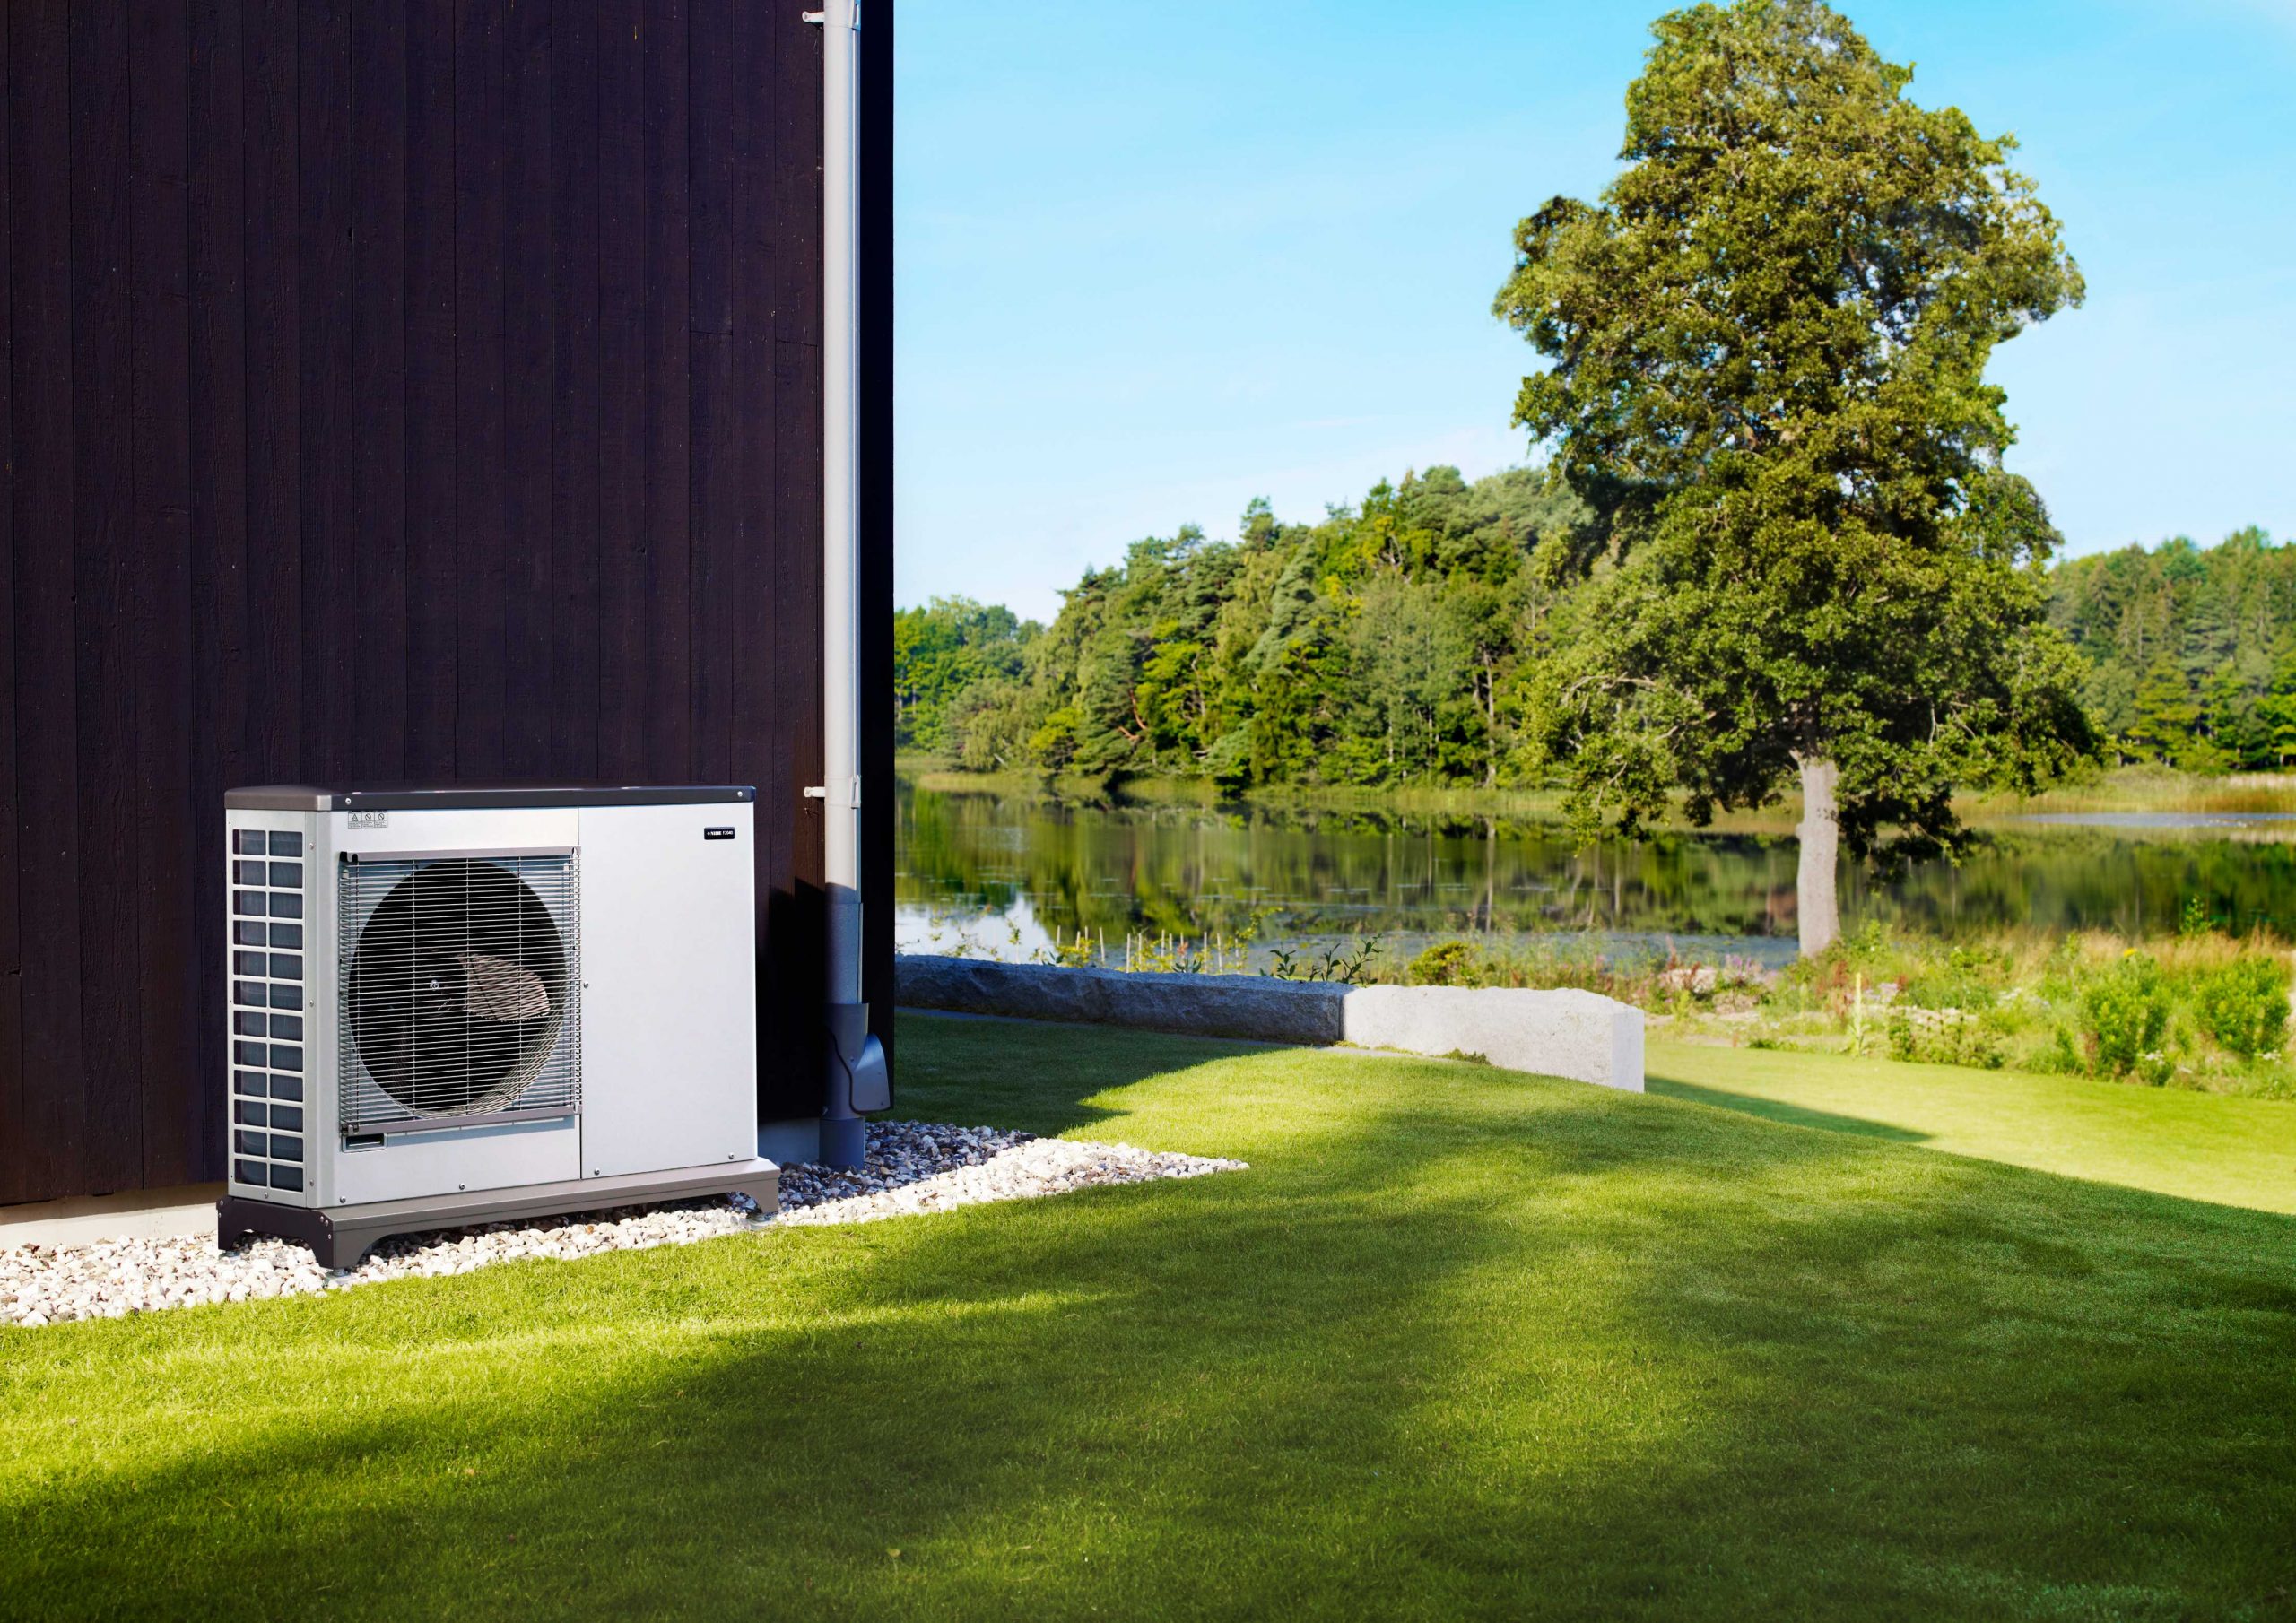 R A Brown: heating systems for comfort, low running costs, future-proofing your property